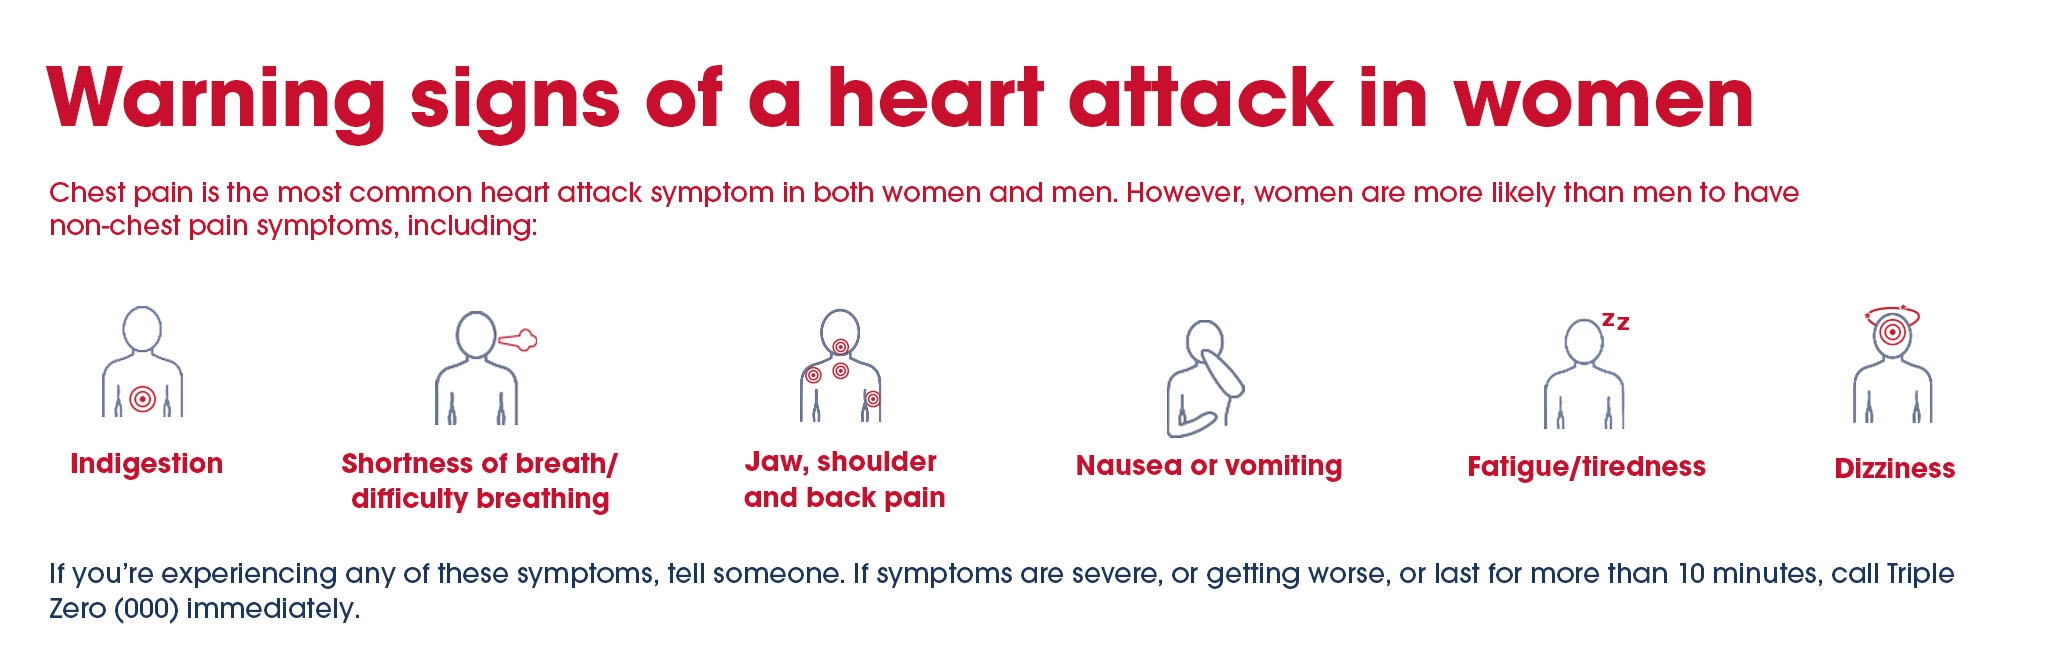 Warning signs of a heart attack in women showing common symptoms